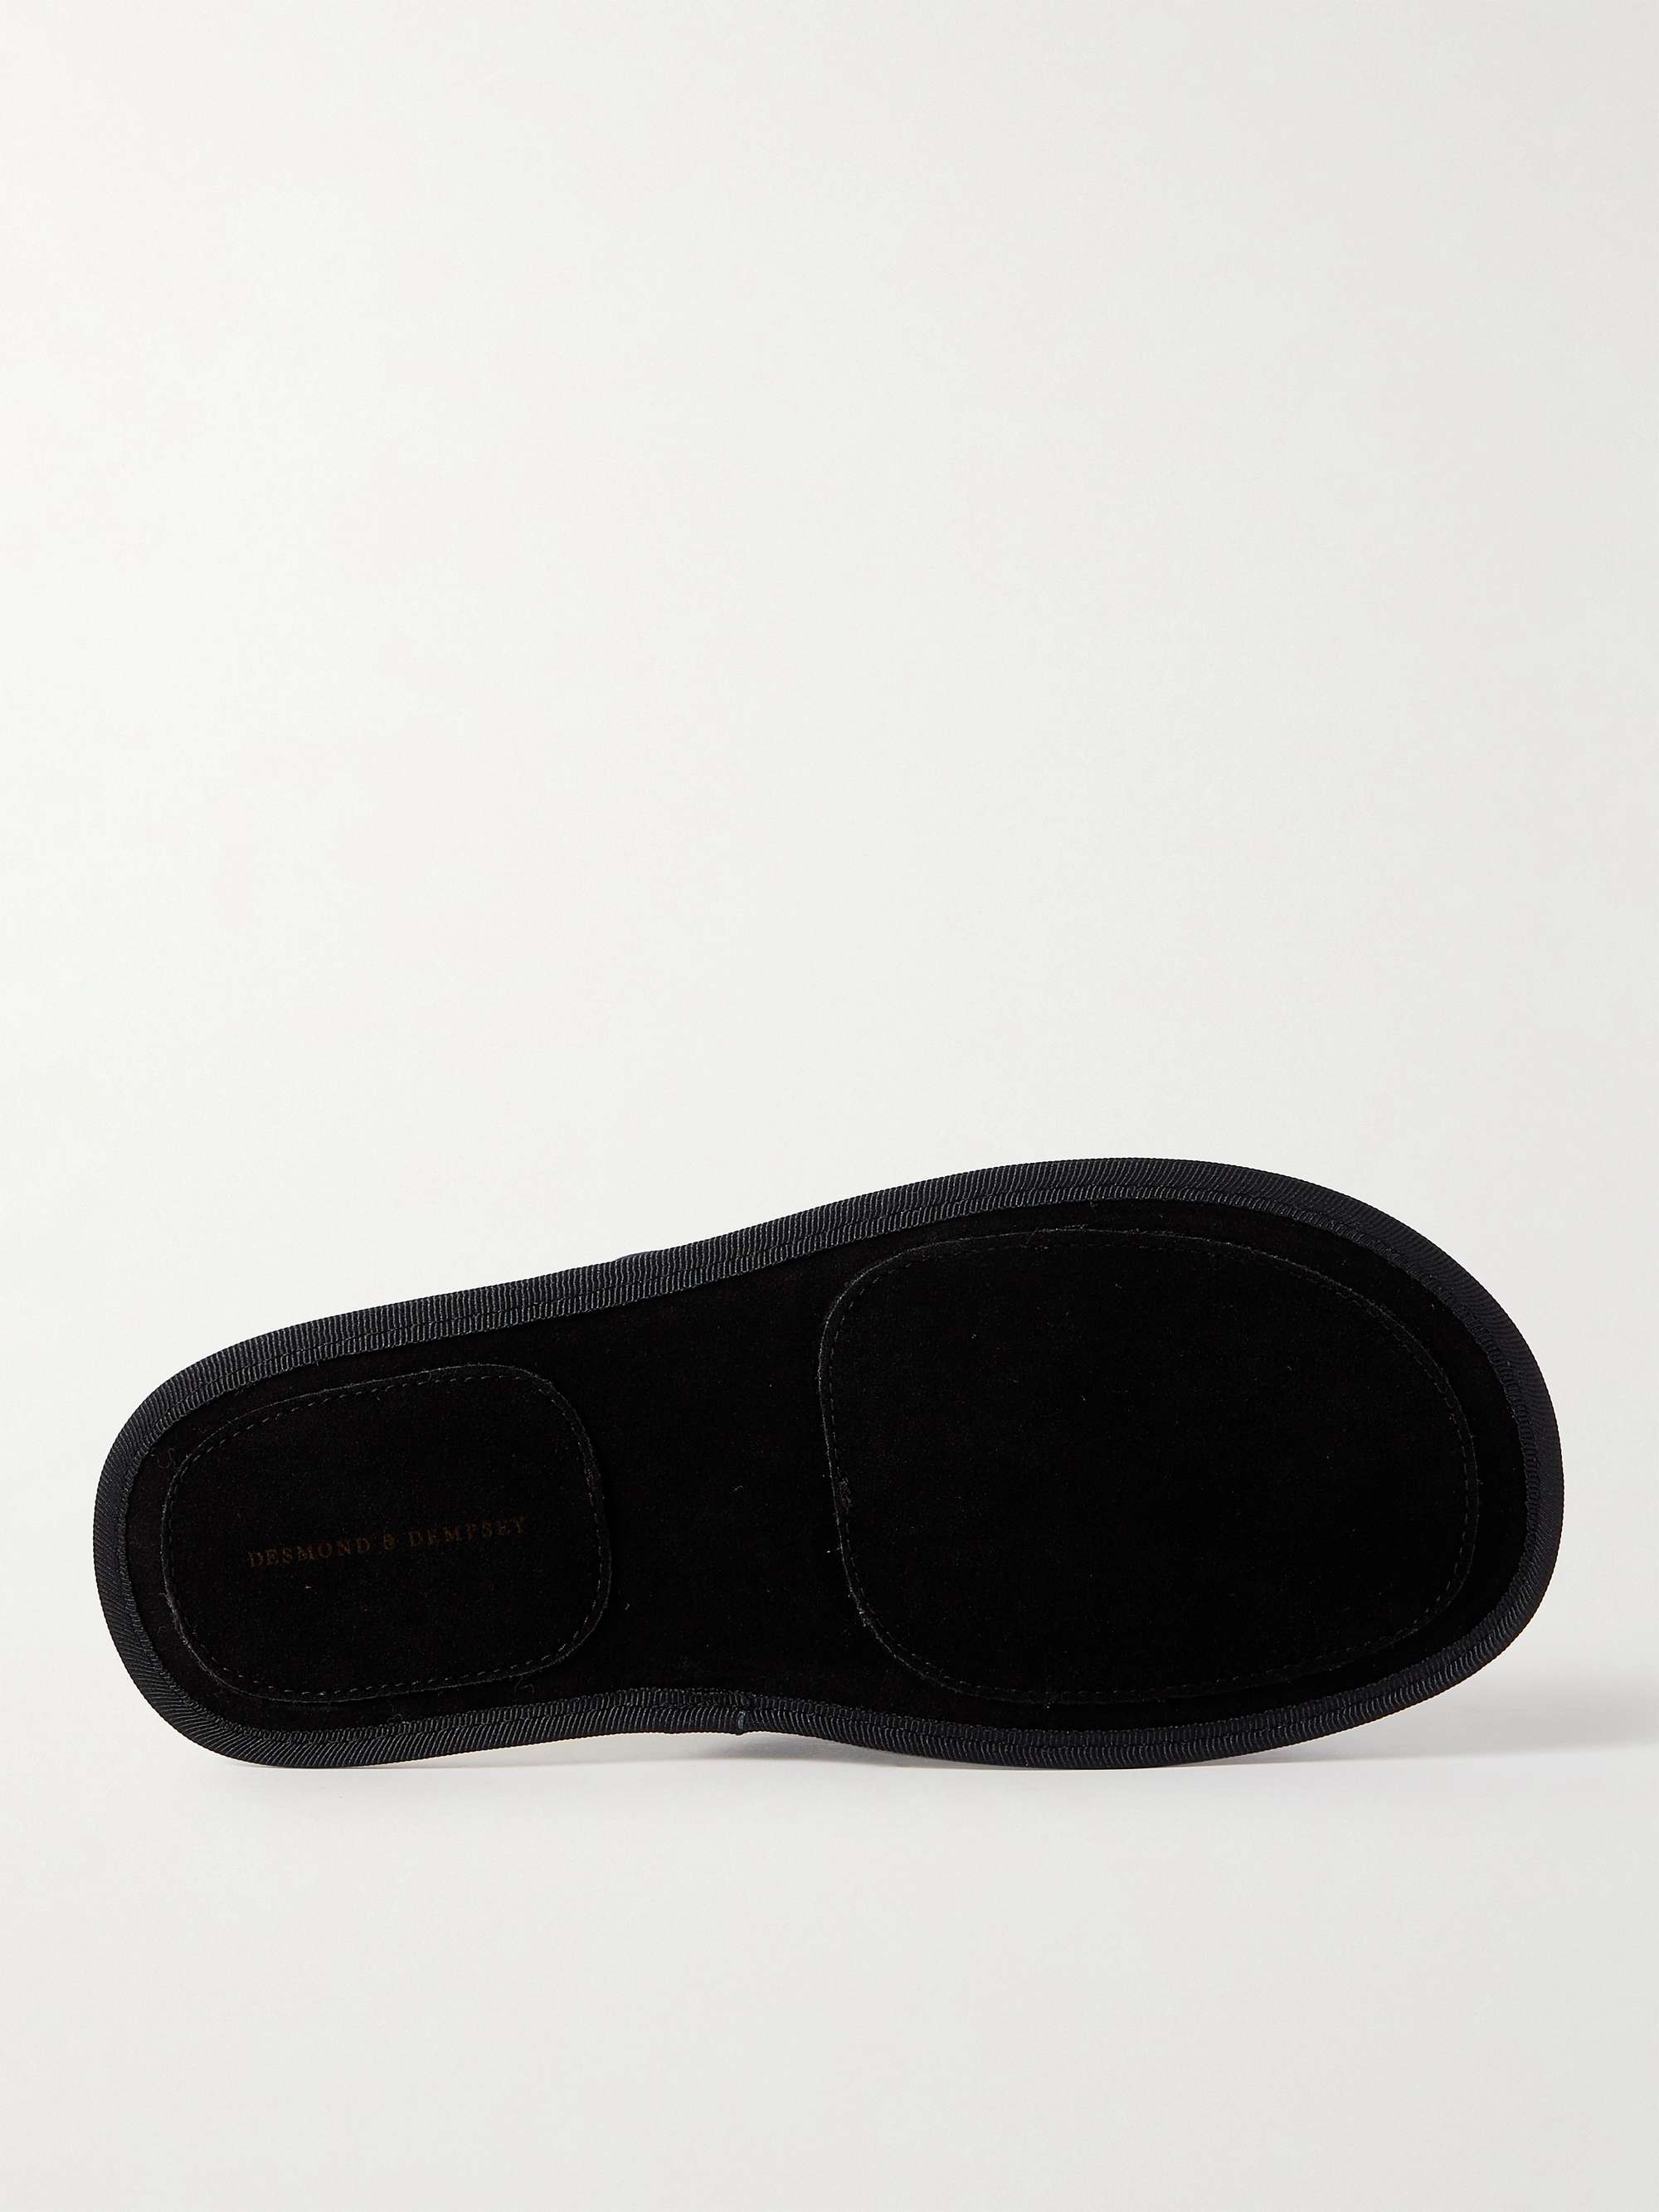 DESMOND & DEMPSEY Byron Wool-Lined Quilted Printed Cotton Slippers